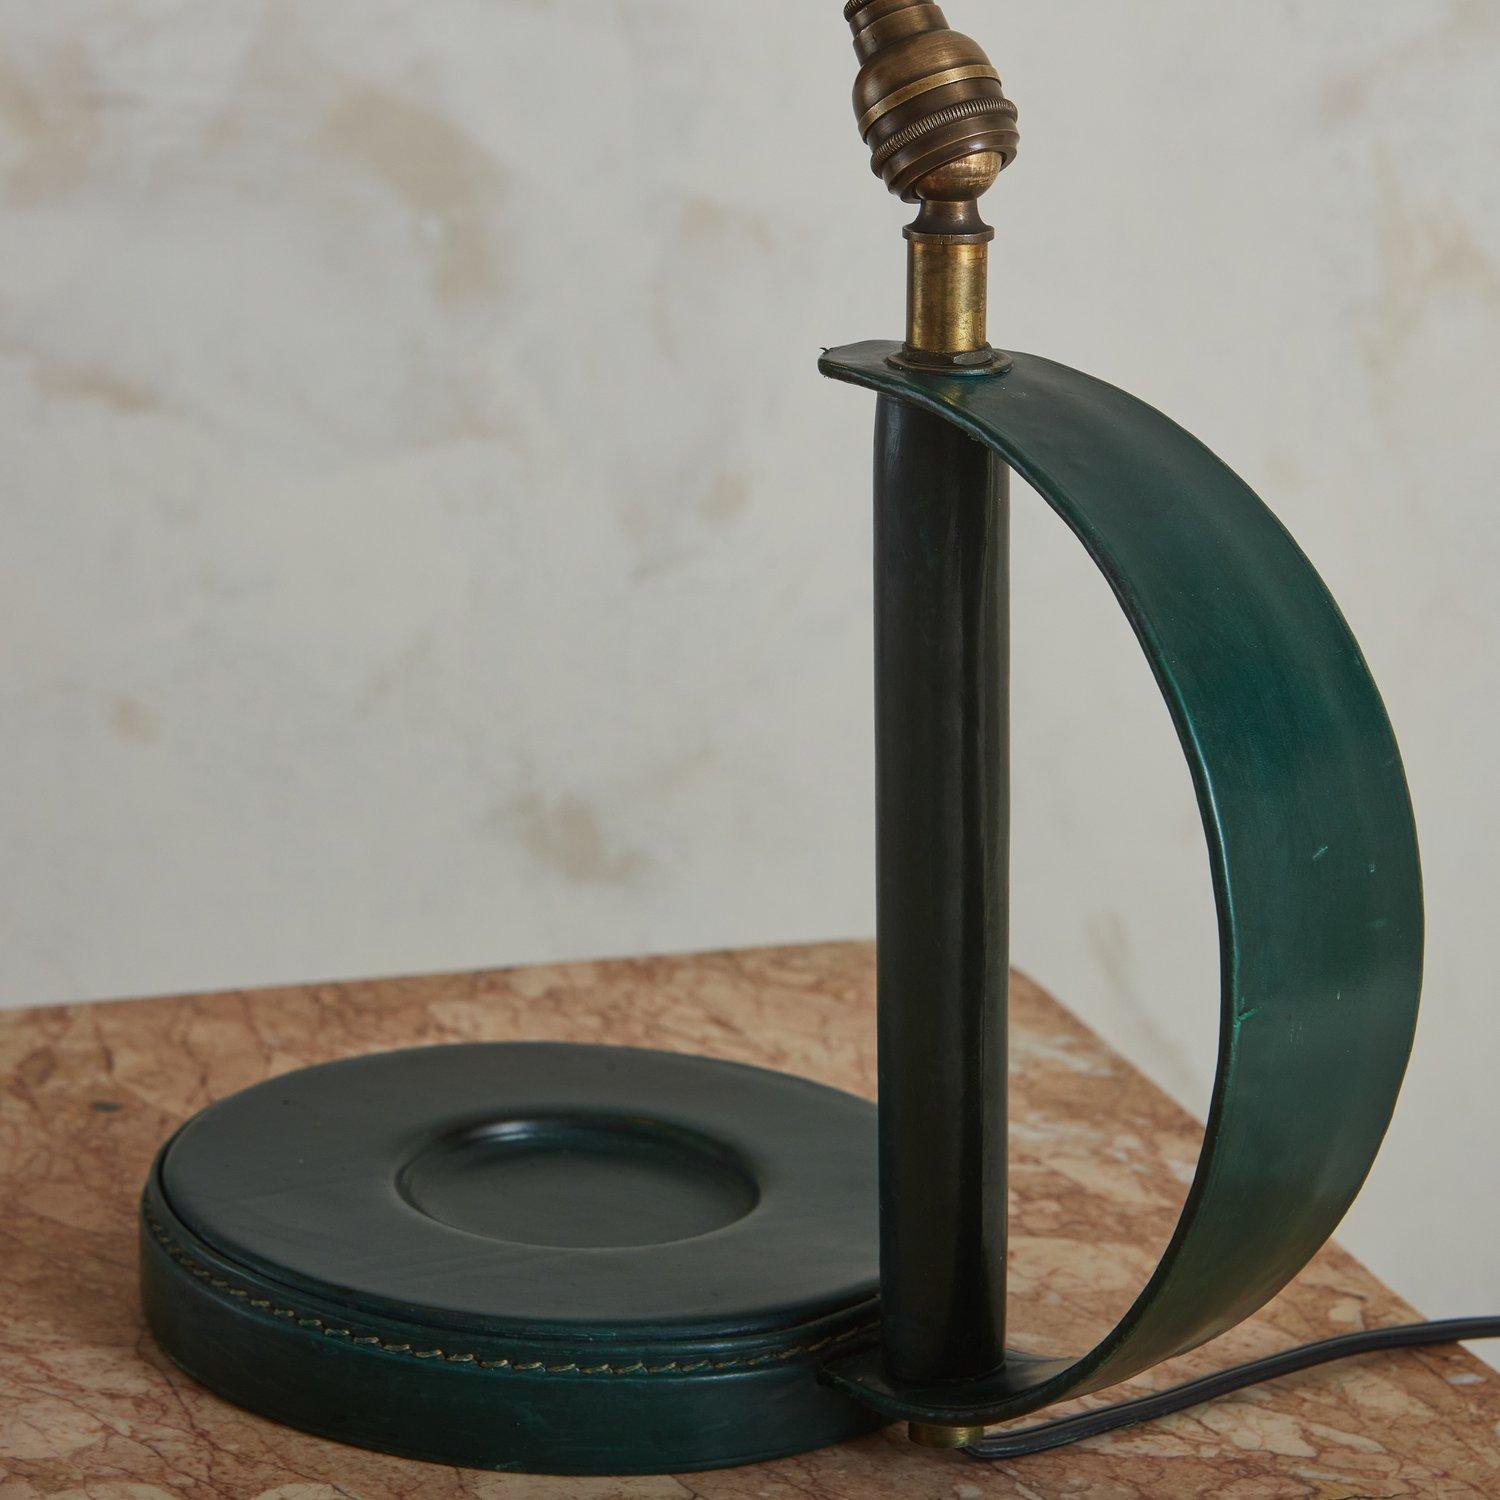 Mid-20th Century Green Leather Desk Lamp in the Style of Jacques Adnet, France 1950s For Sale